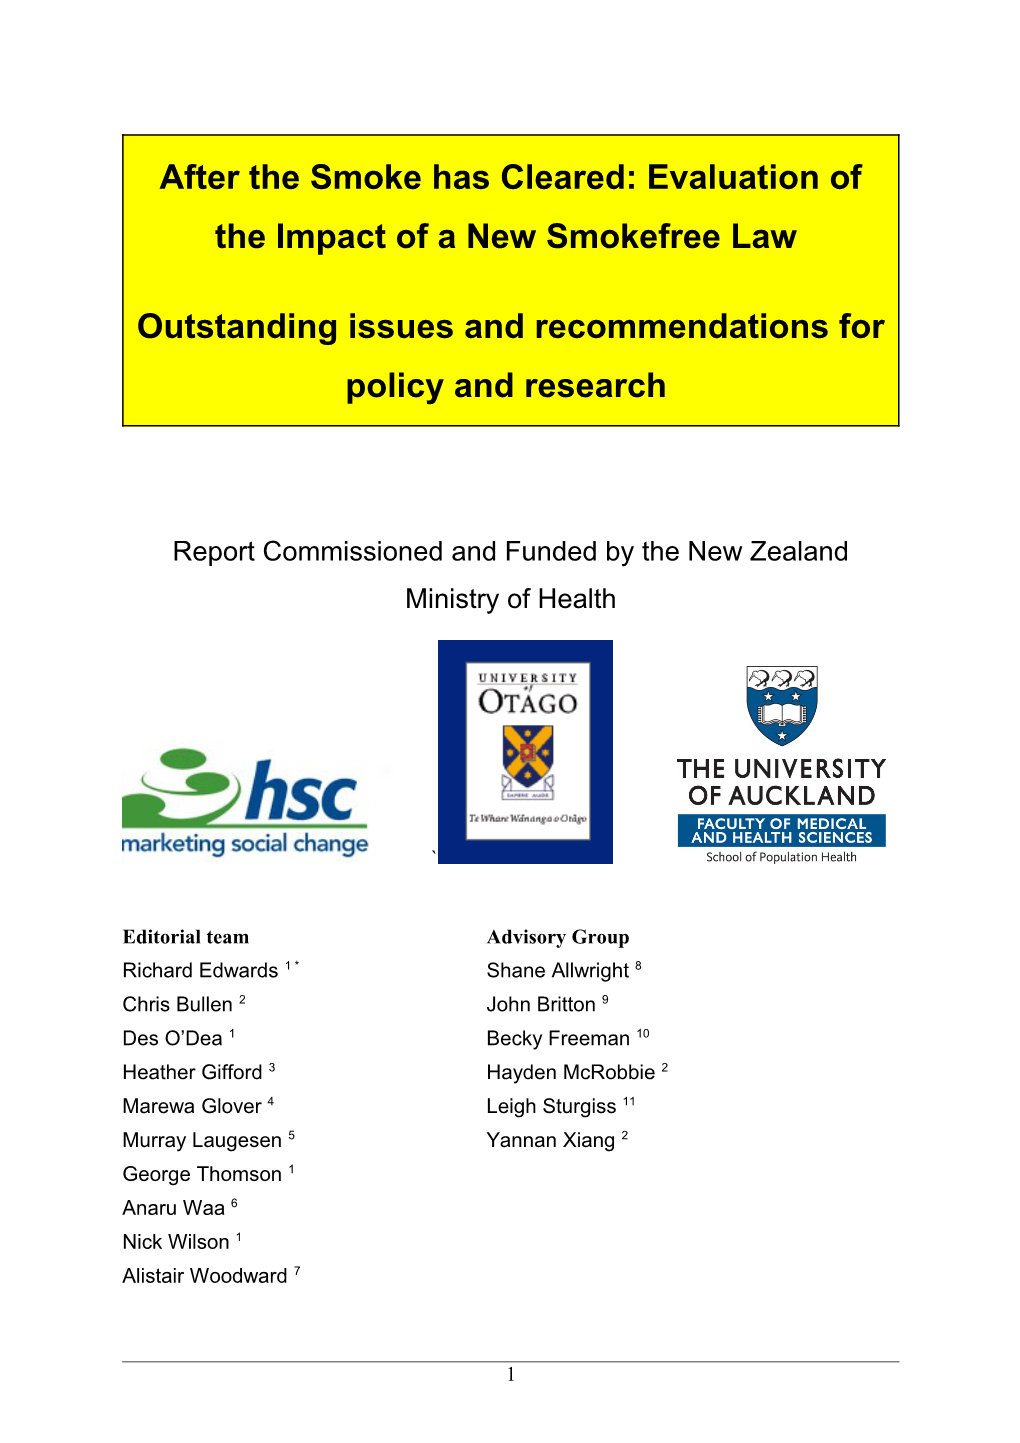 After the Smoke Has Cleared: Evaluation of the Impact of a New Smokefree Law